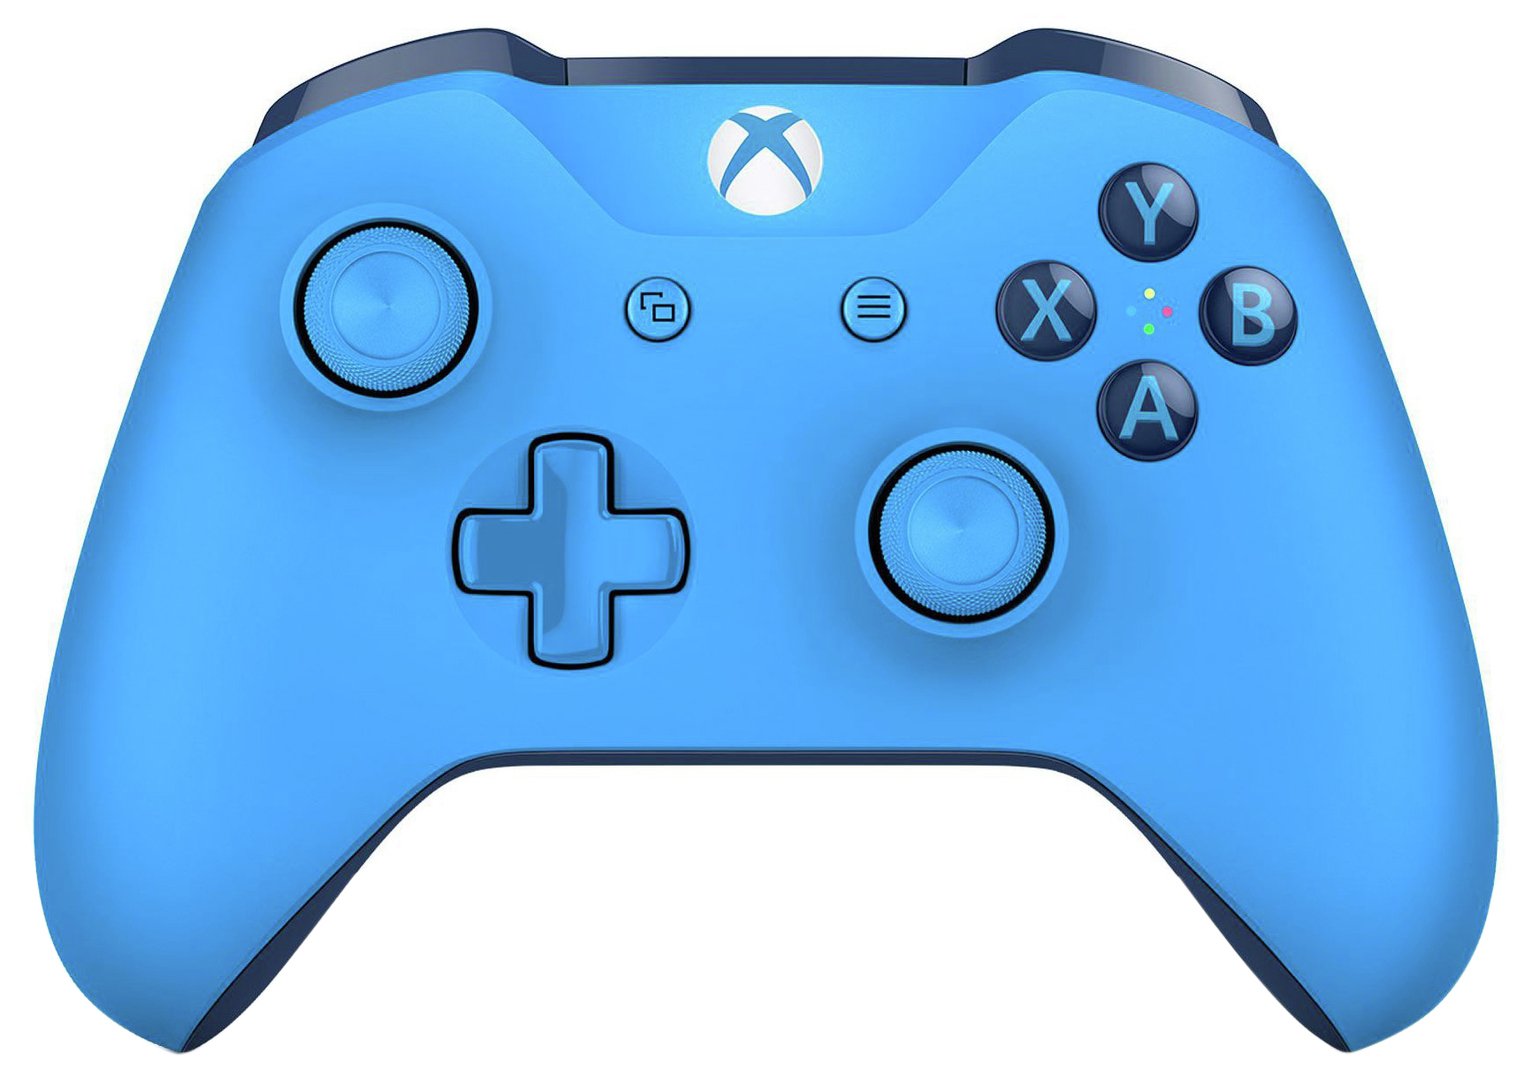 Official Xbox One Wireless Controller 3.5mm - Blue